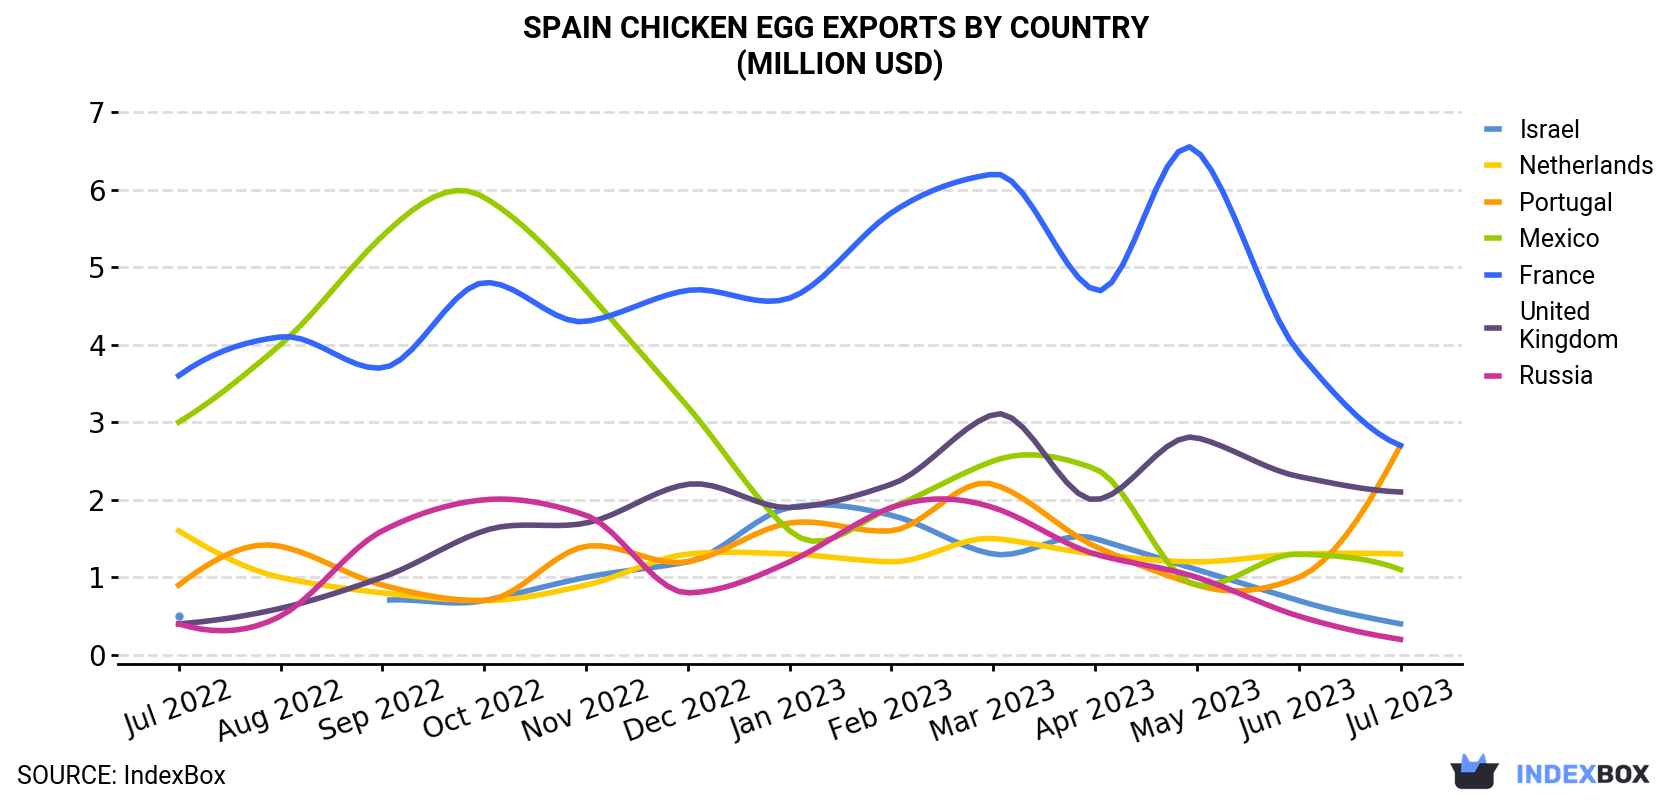 Spain Chicken Egg Exports By Country (Million USD)